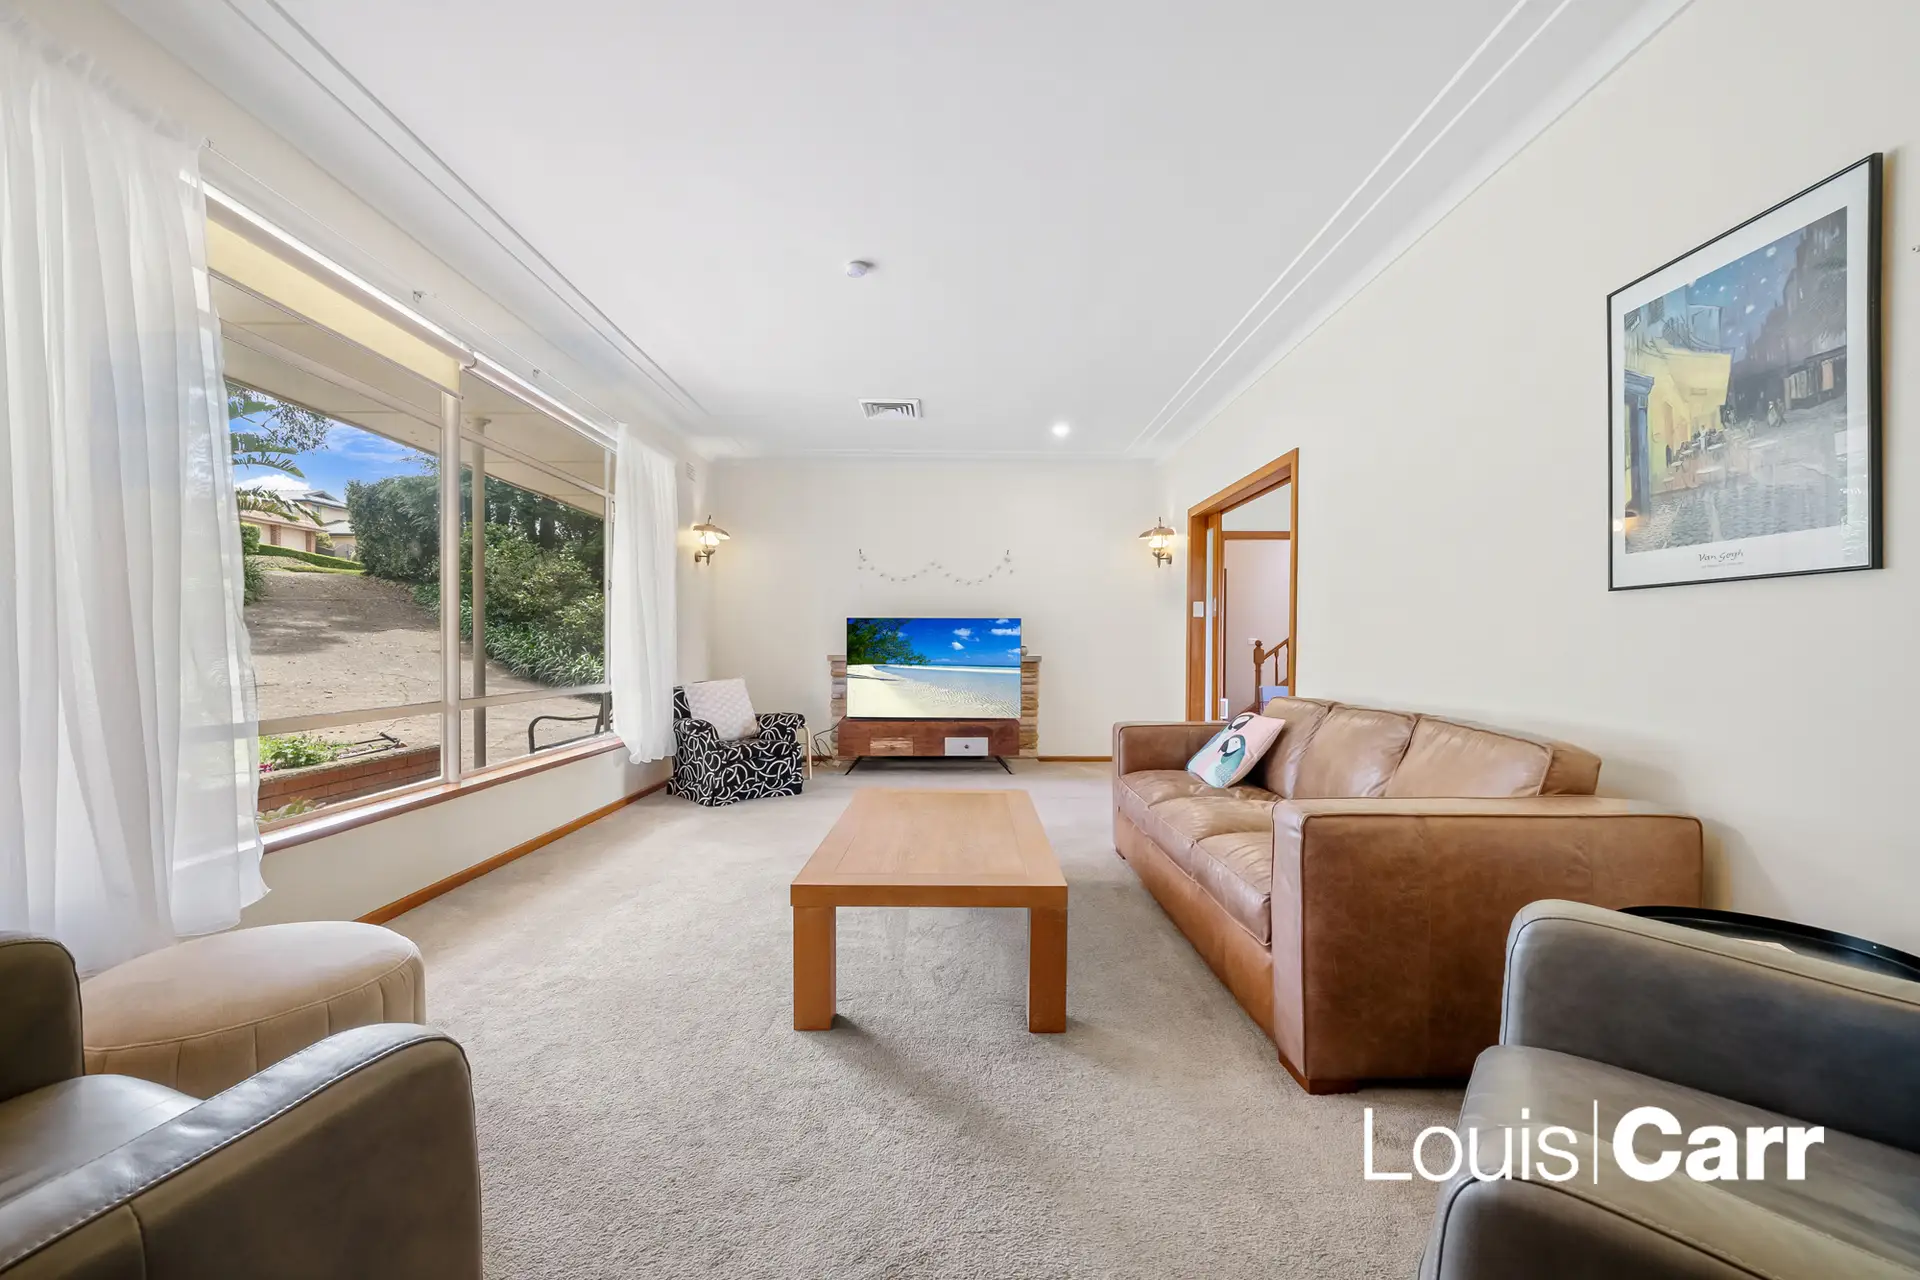 Photo #6: 18-20 Blacks Road, West Pennant Hills - Sold by Louis Carr Real Estate